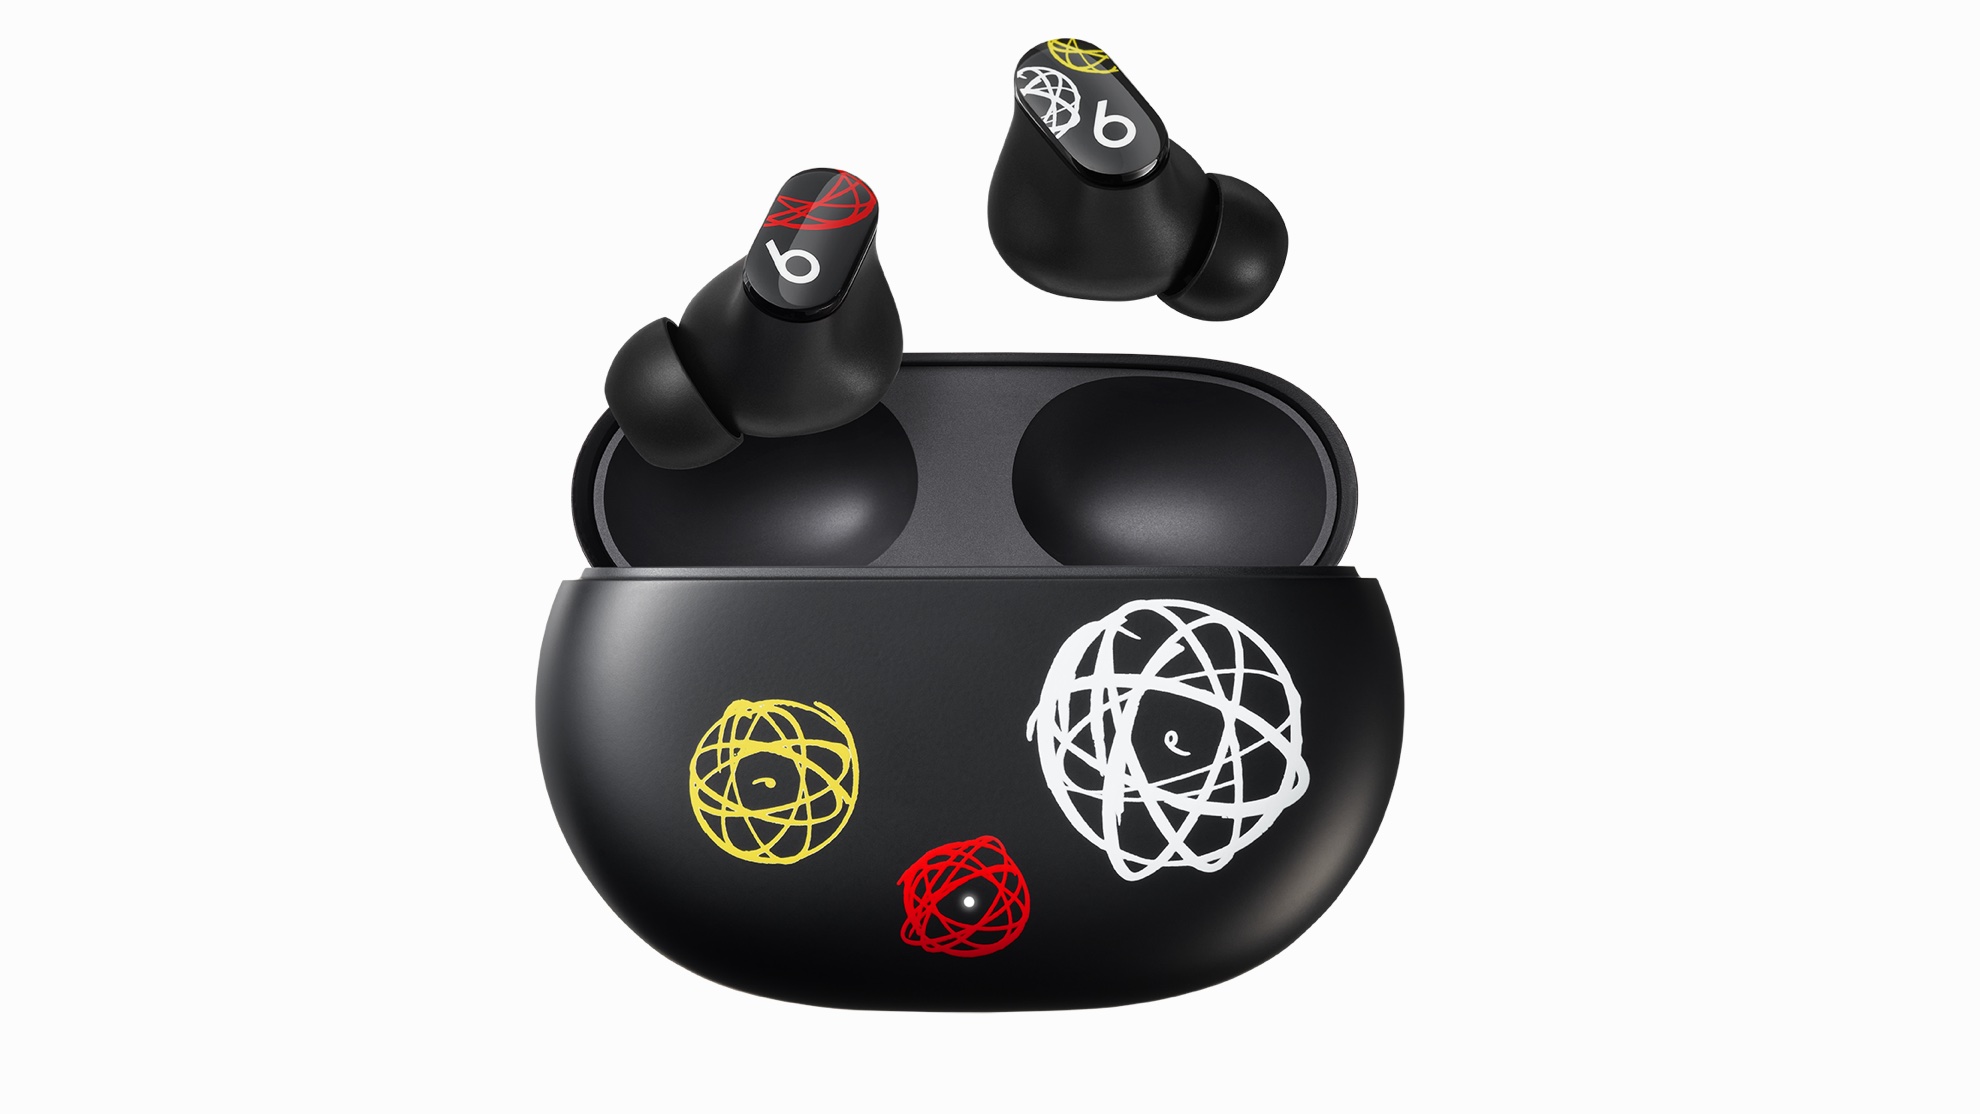 Legendary Graffiti Artist Futura Has Teamed Up With Beats by Dre to Design  Special-Edition Atomic Earbuds